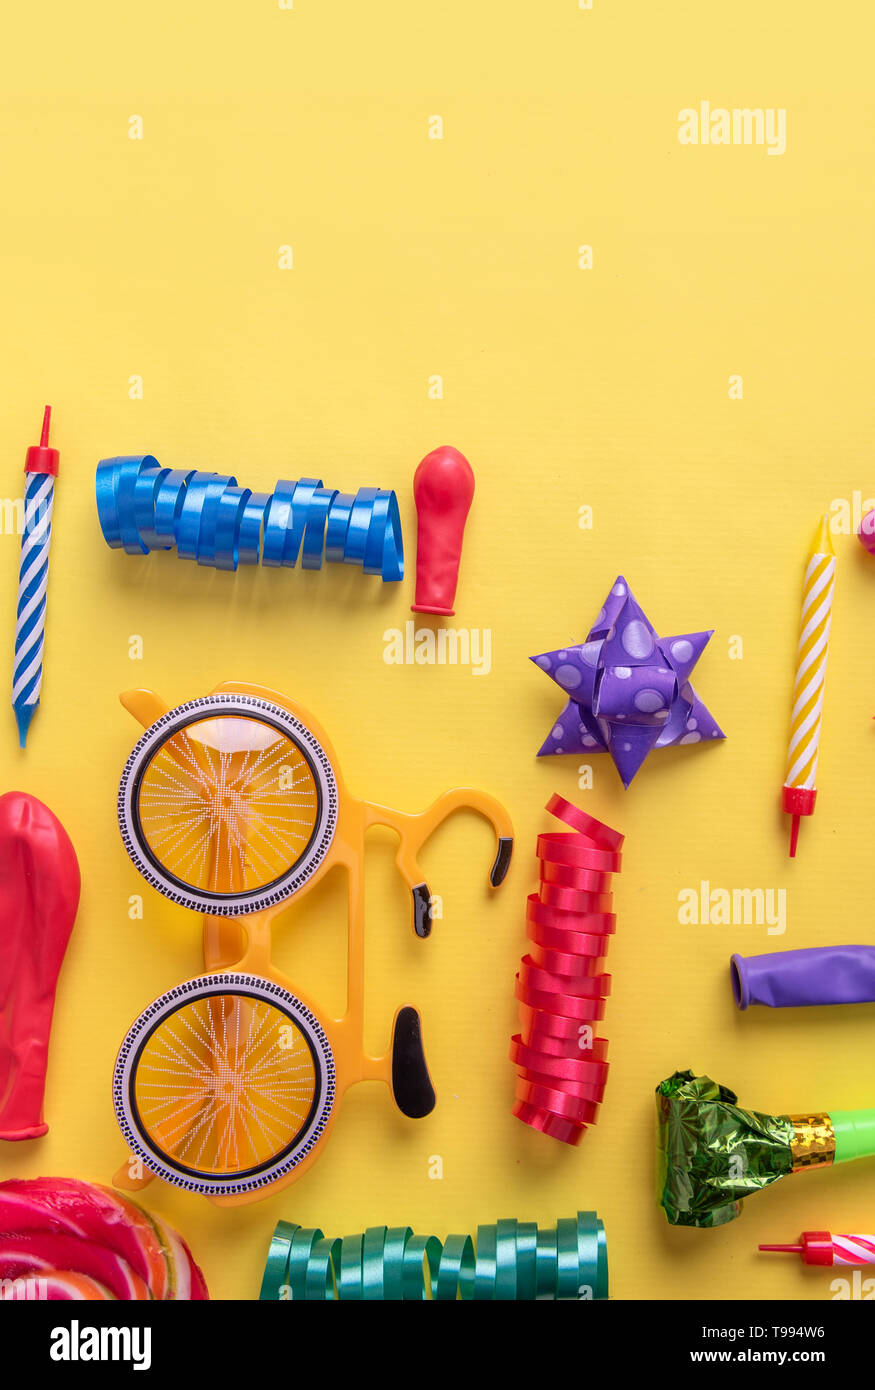 Items for carnival on yellow background. Stock Photo